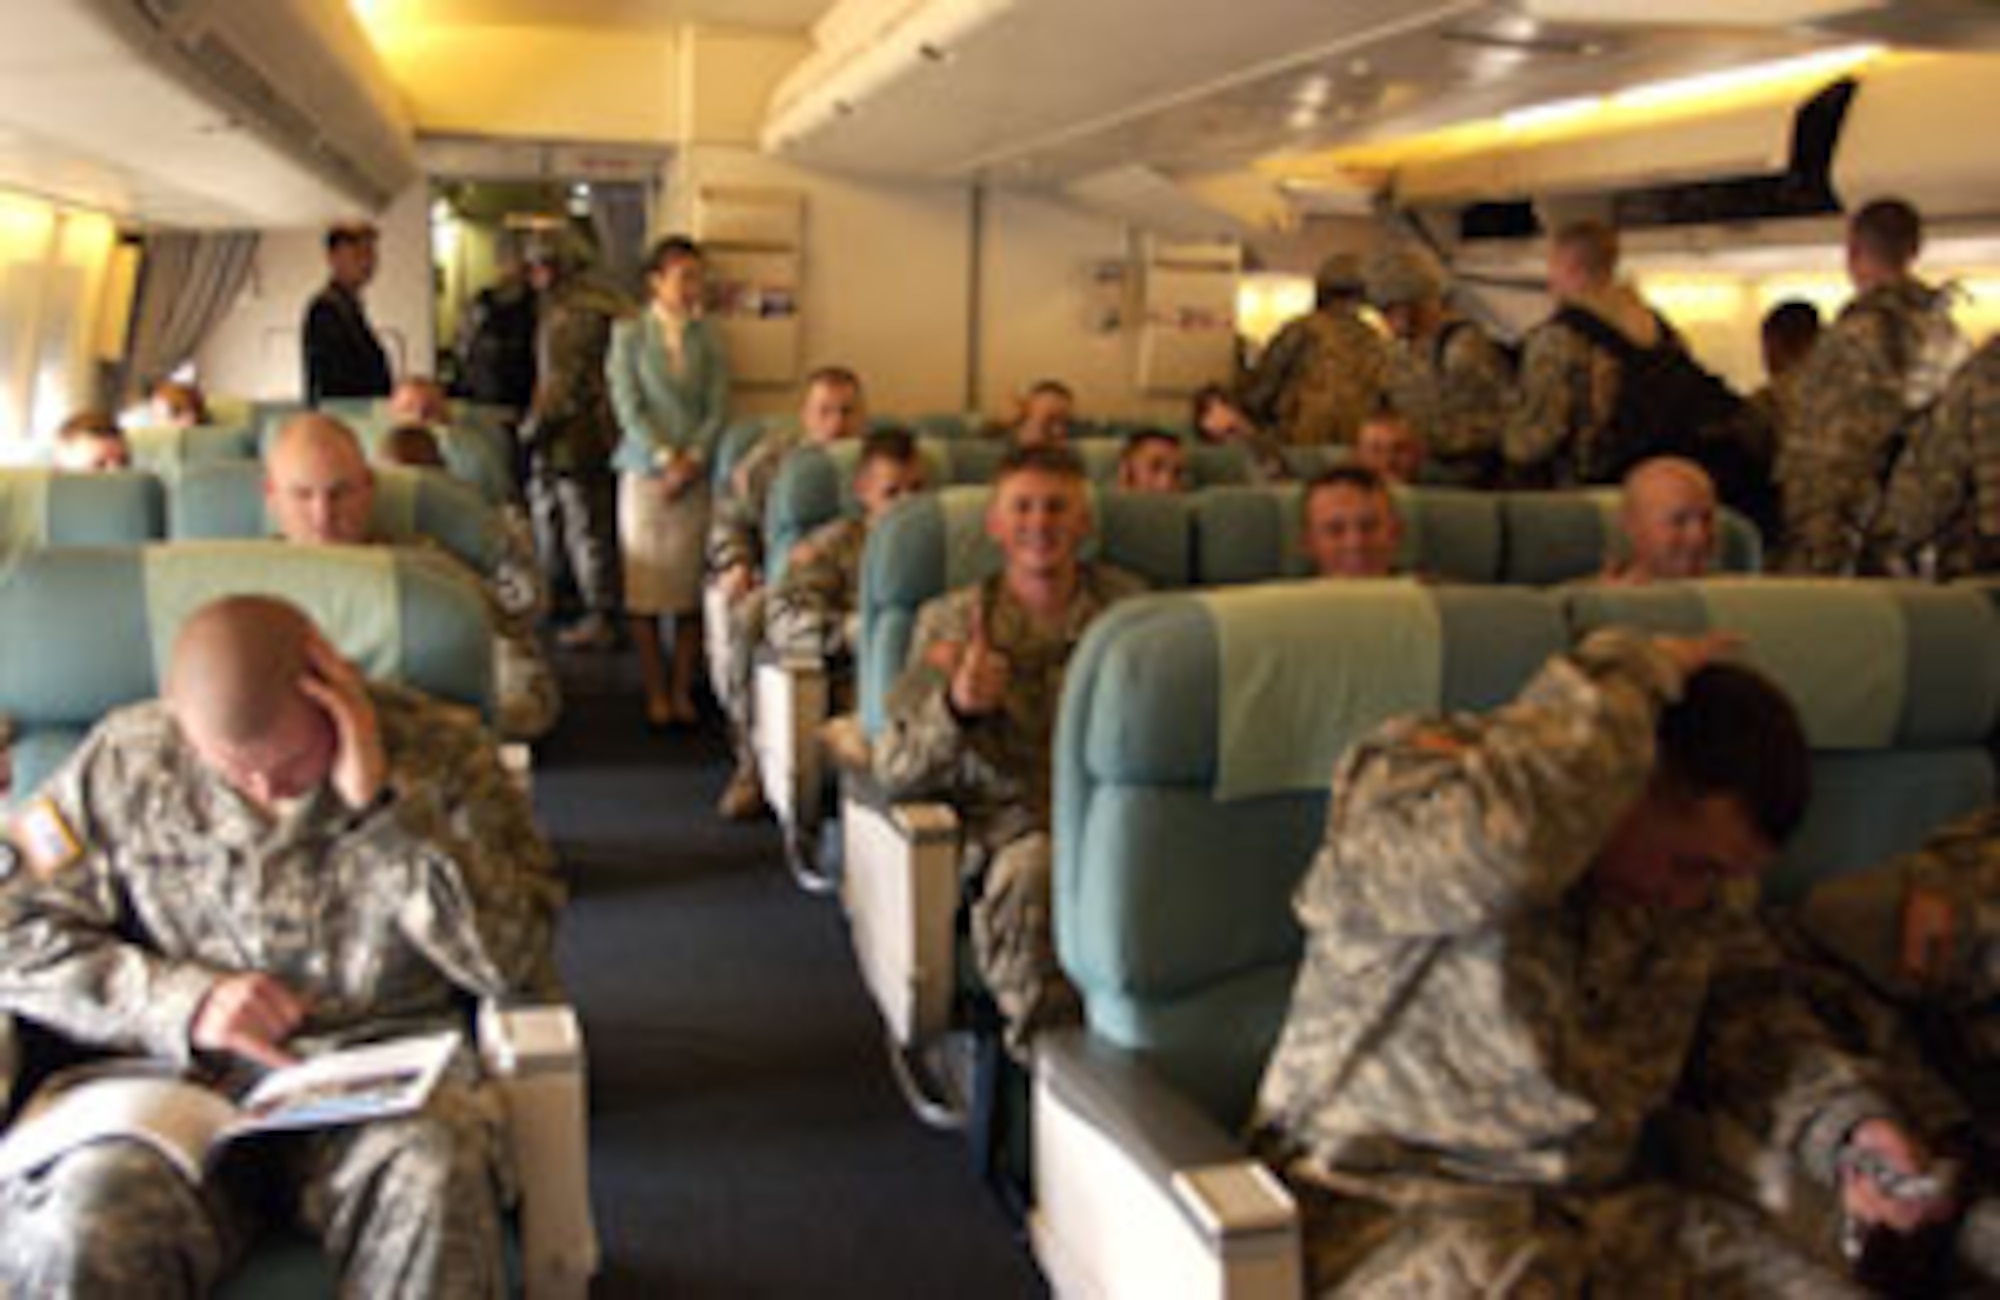 Soldiers from Fort Irwin, Calif., get comfortable on a Korean Air  747 before it departs March Air Reserve Base, Calif.  The aircraft landed Wednesday at March ARB to pick up passengers making it the first time a Korean airlines aircraft physically has been exercised as part of the 26 year Mutual Airlift Support Agreement between the Department of Defense and the South Korean Air Force.  (U.S. Air Force photo by Staff Sgt. Amy Abbott, 452 AMW/PA)                            